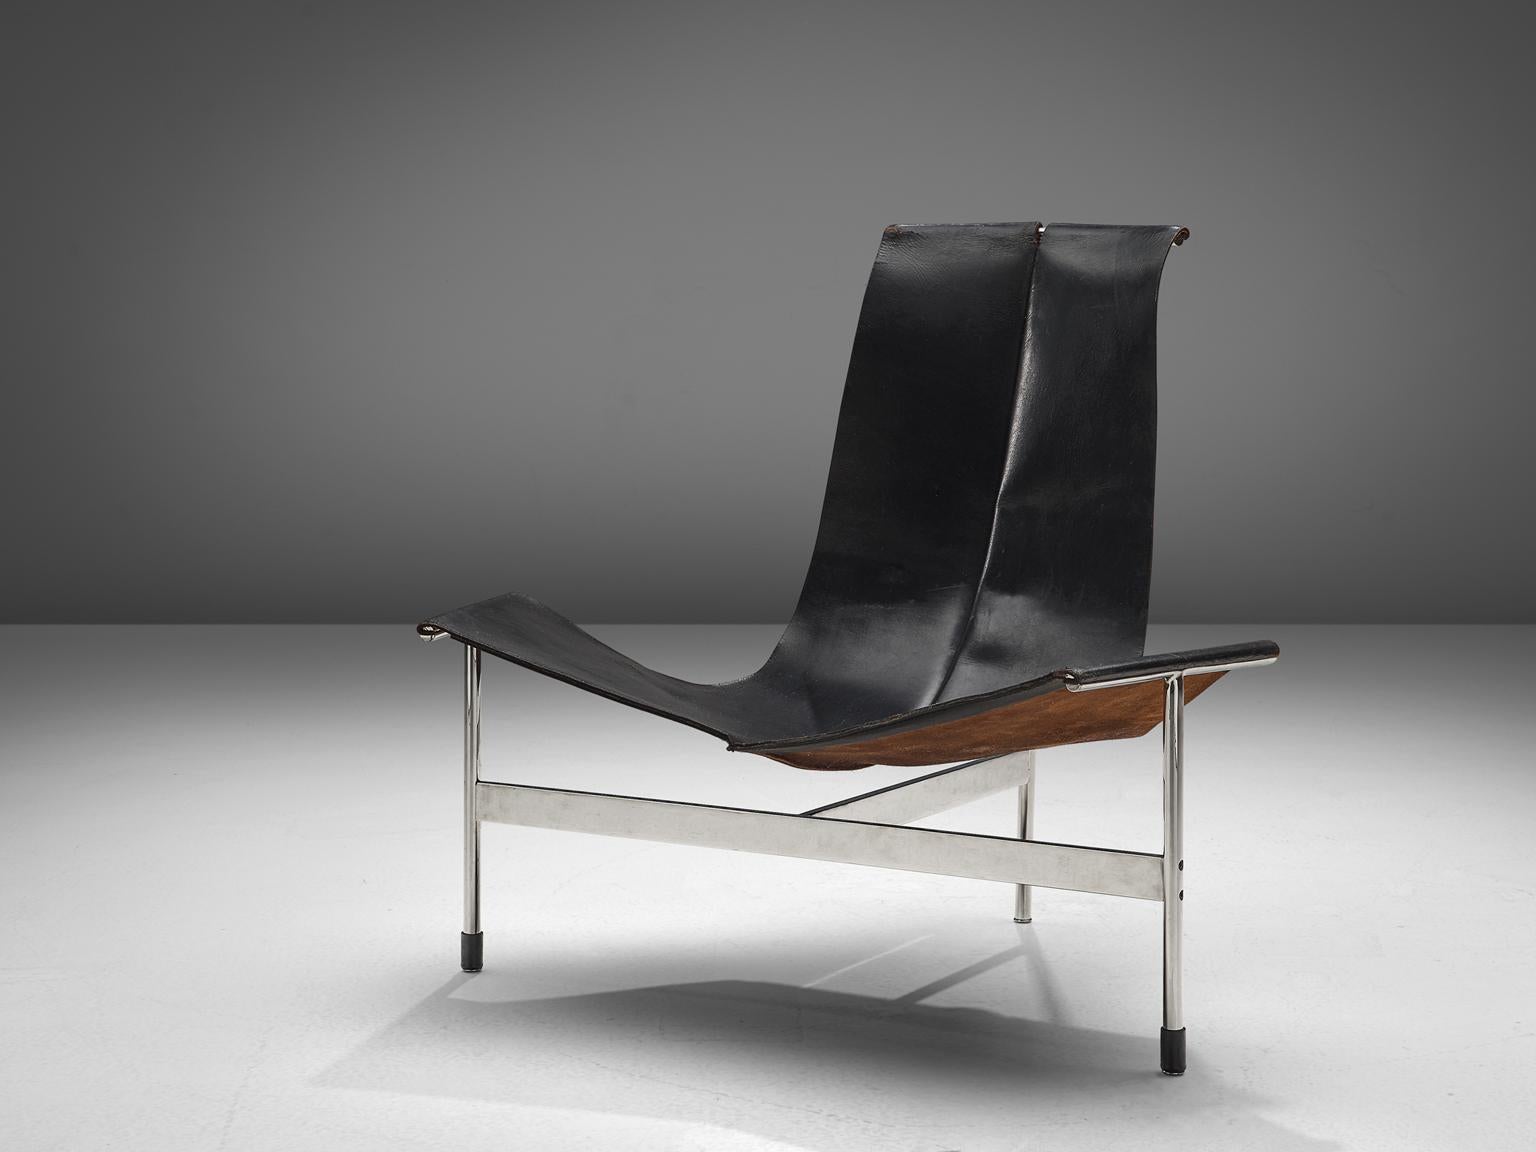 T Lounge Chair by Katavolos, Littell, & Kelley for Laverne International, United Stated, 1952.

In 1952, William Katavolos designed, together with Douglas Kelley & Ross Littell, the iconic sling-back T chair as model 3LC in Laverne International's